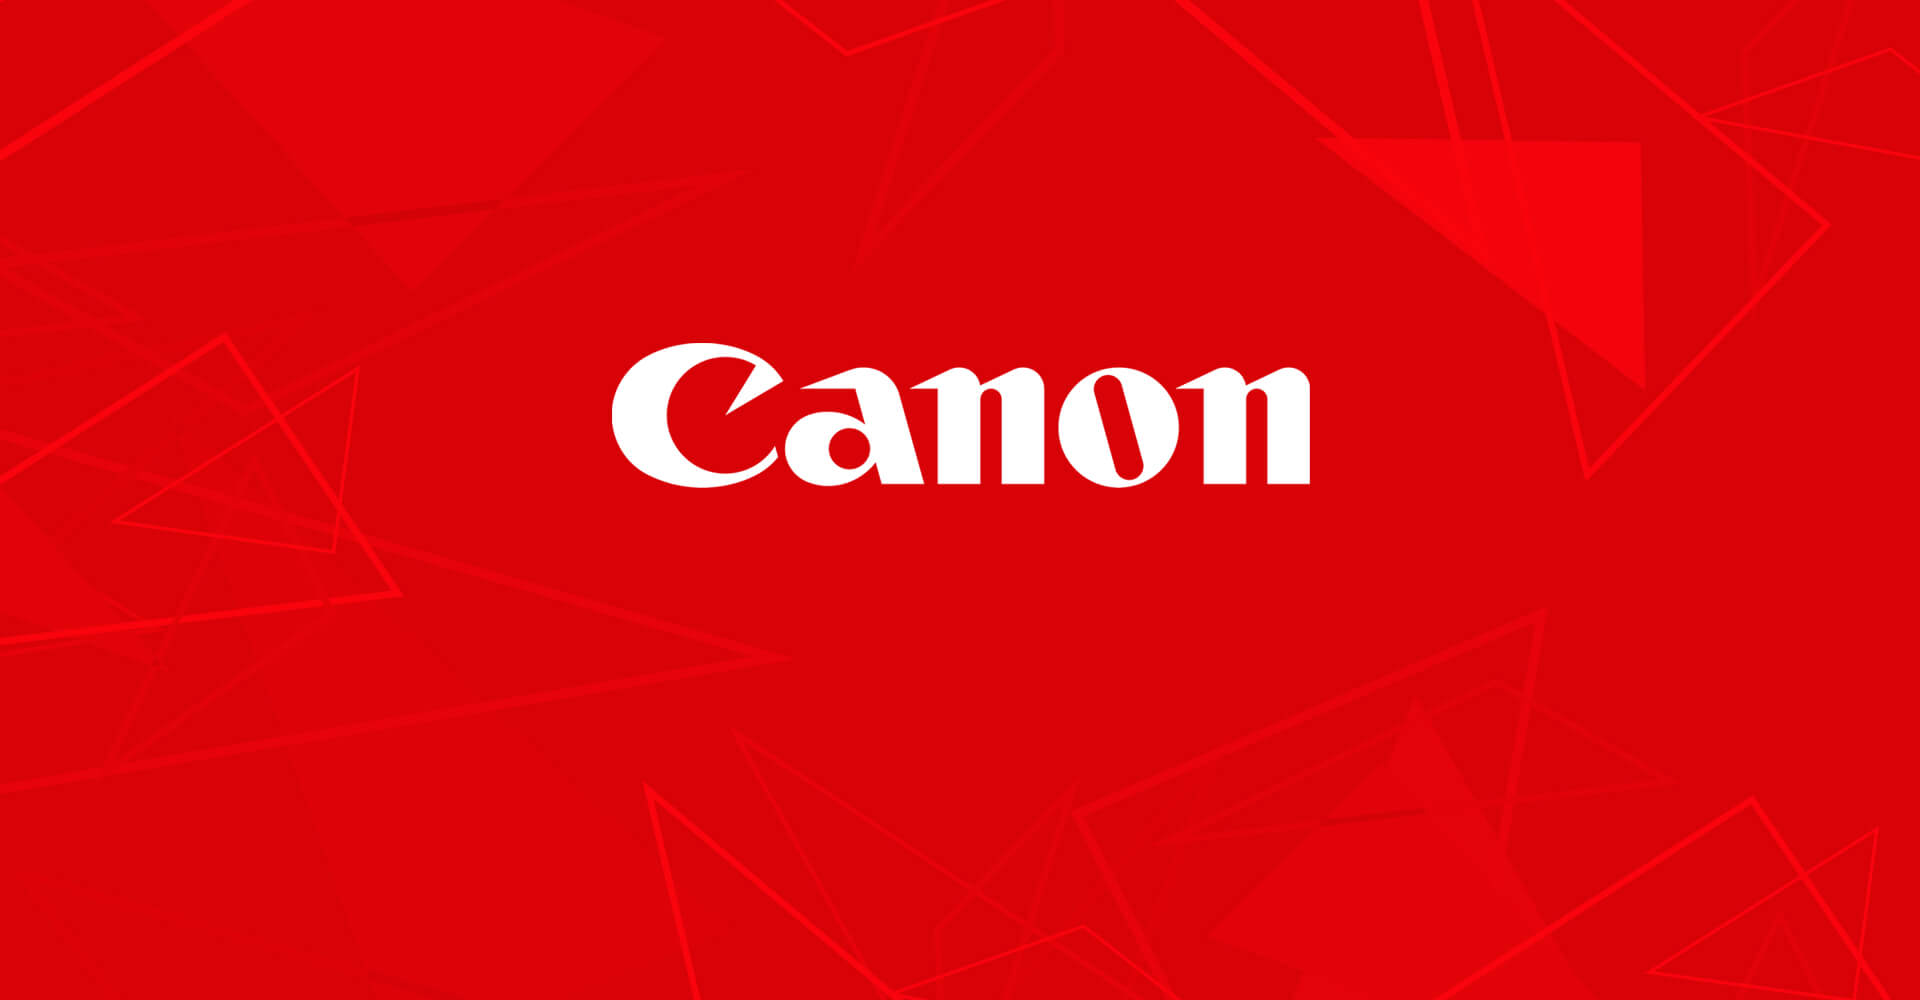 CANON LAUNCHES PRISMAsync V7 PRINT SERVERS FOR NEW imagePRESS C910 SERIES